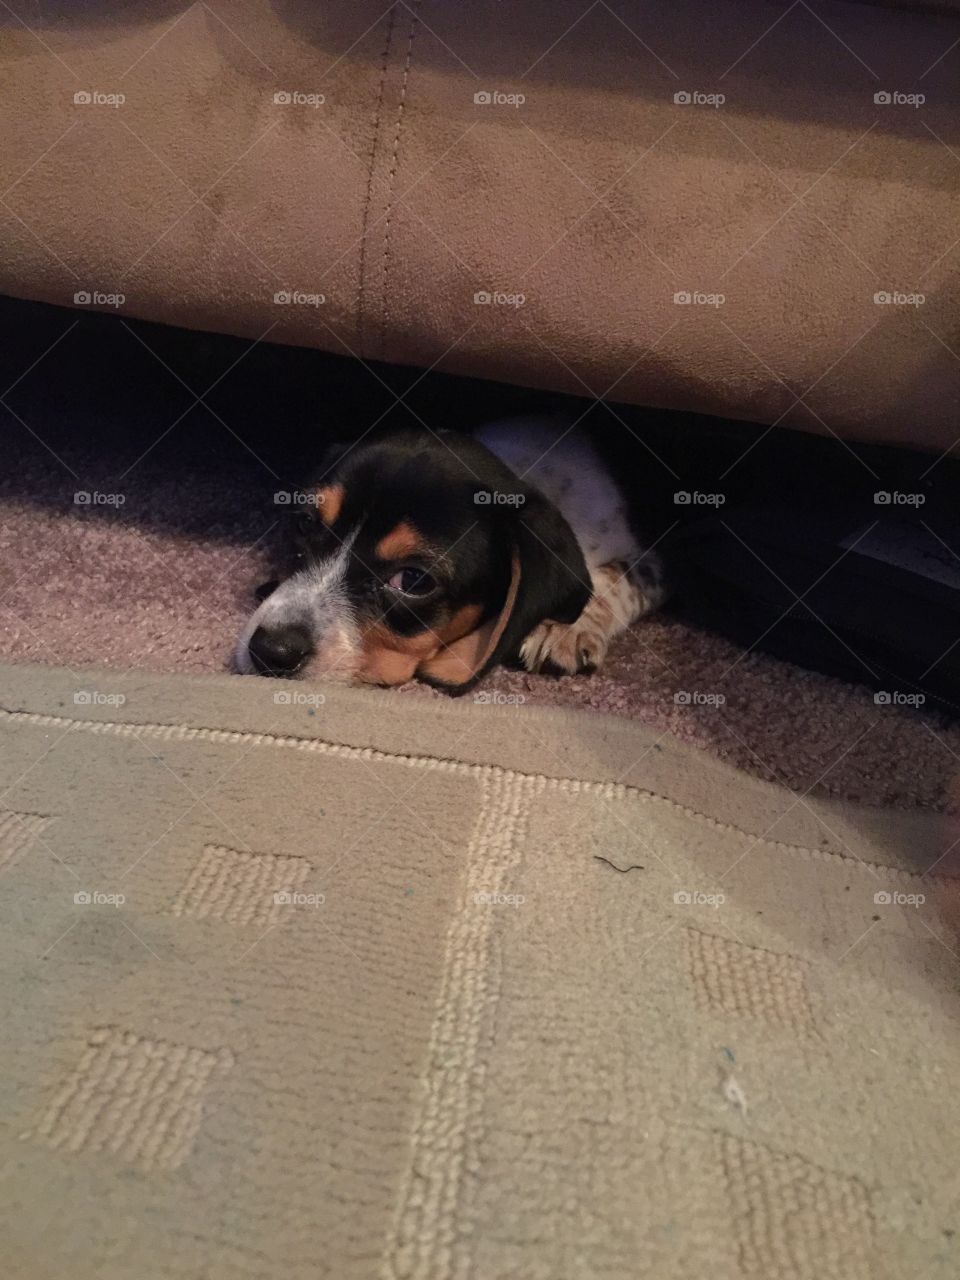 Being lazy with laying under the couch 